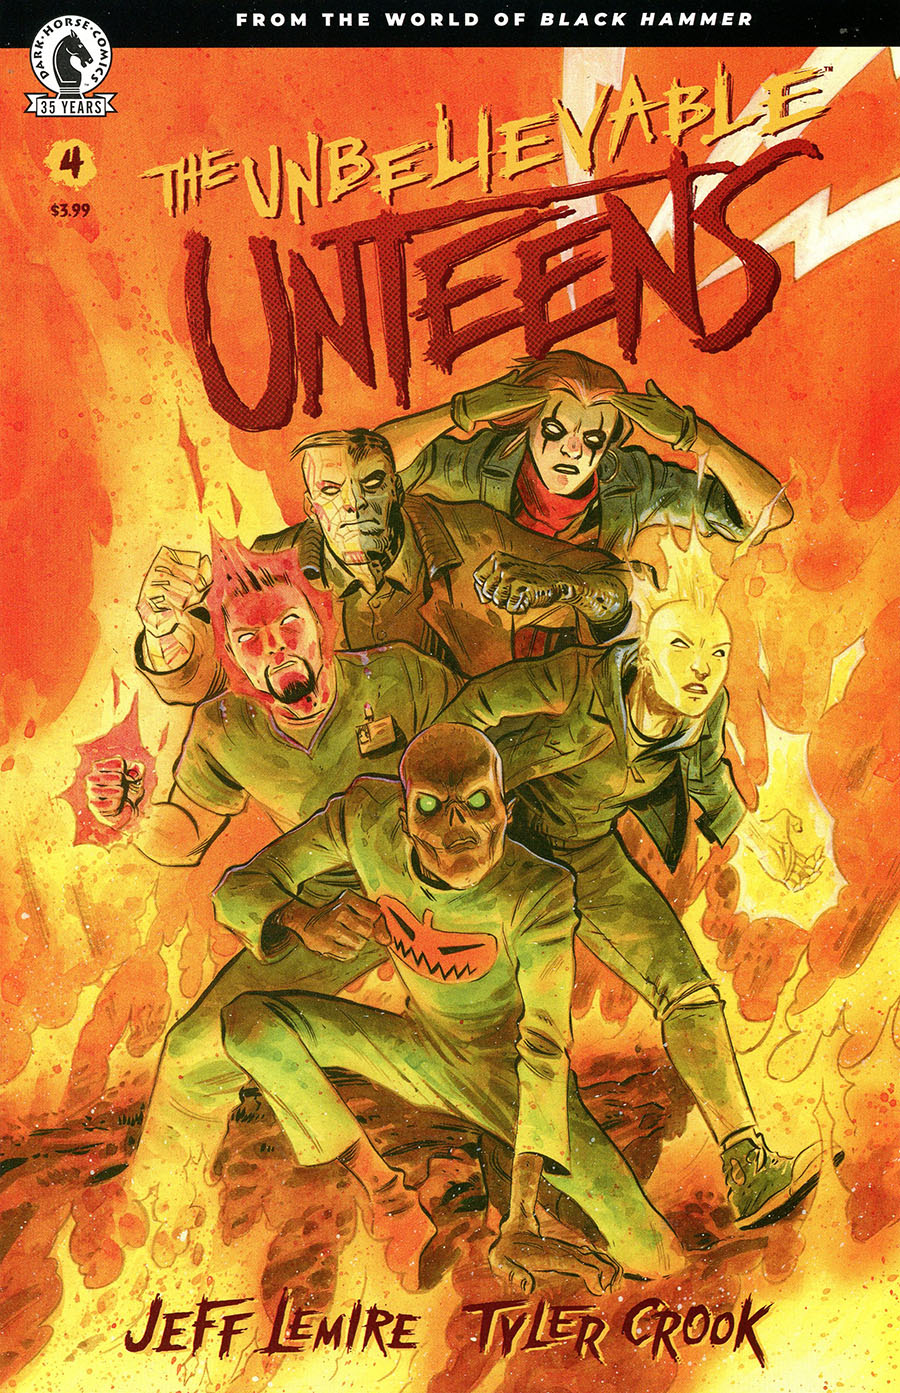 Unbelievable Unteens From The World Of Black Hammer #4 Cover A Regular Tyler Crook Cover